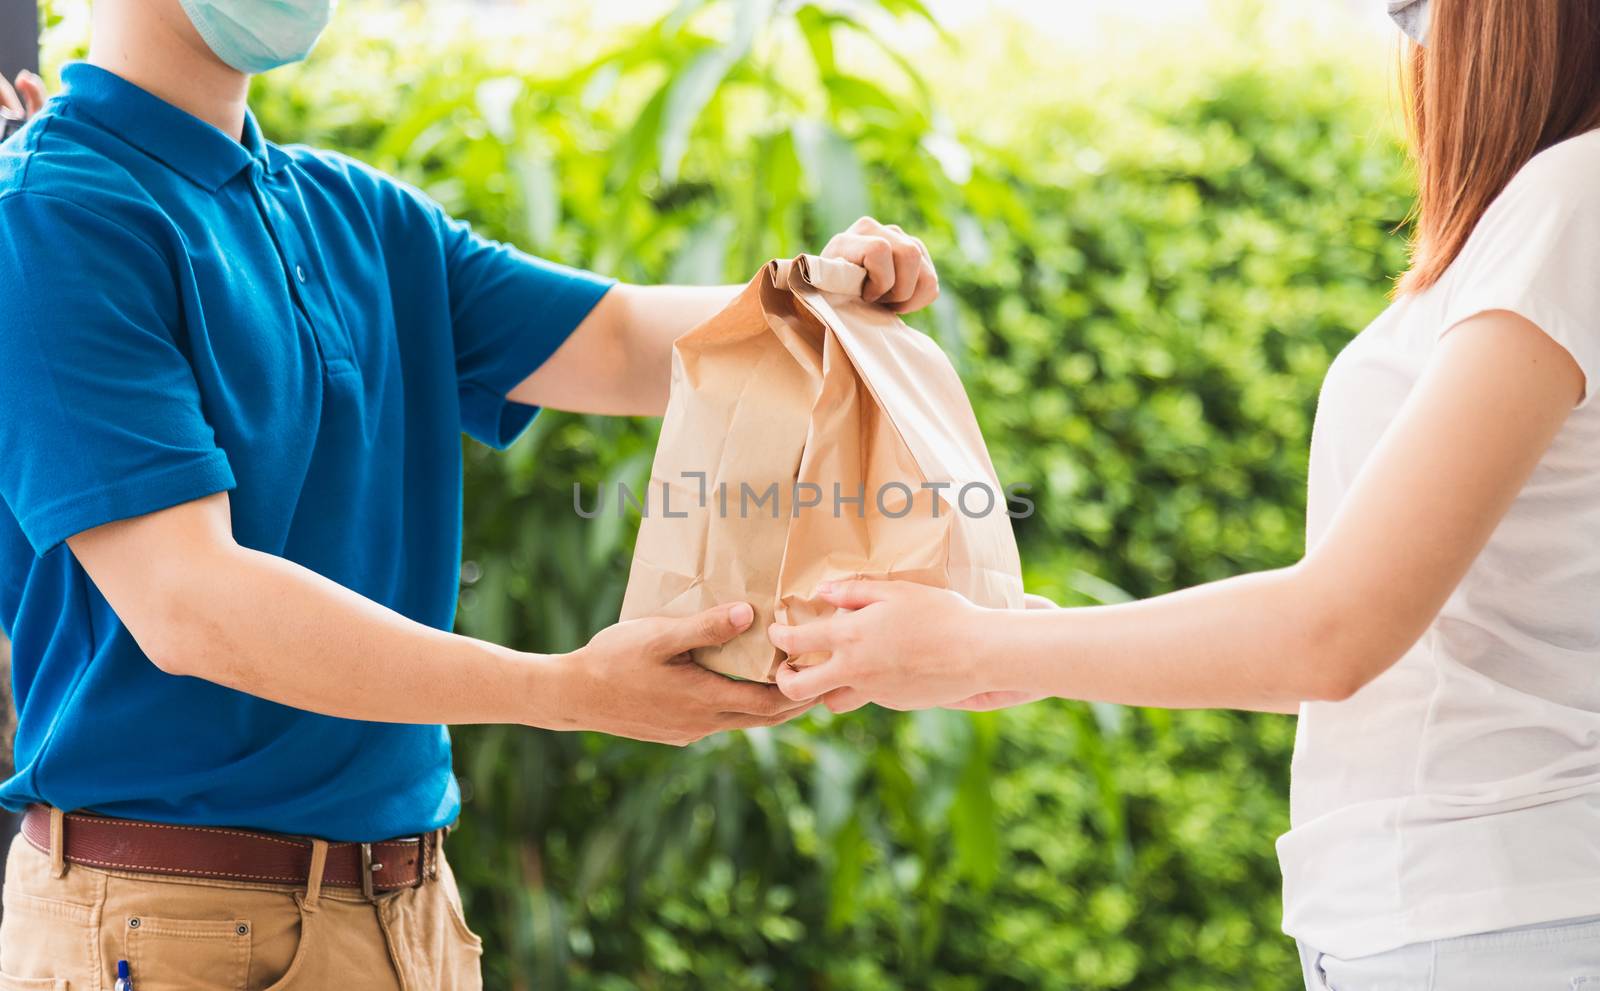 delivery express courier young man giving paper bags fast food t by Sorapop